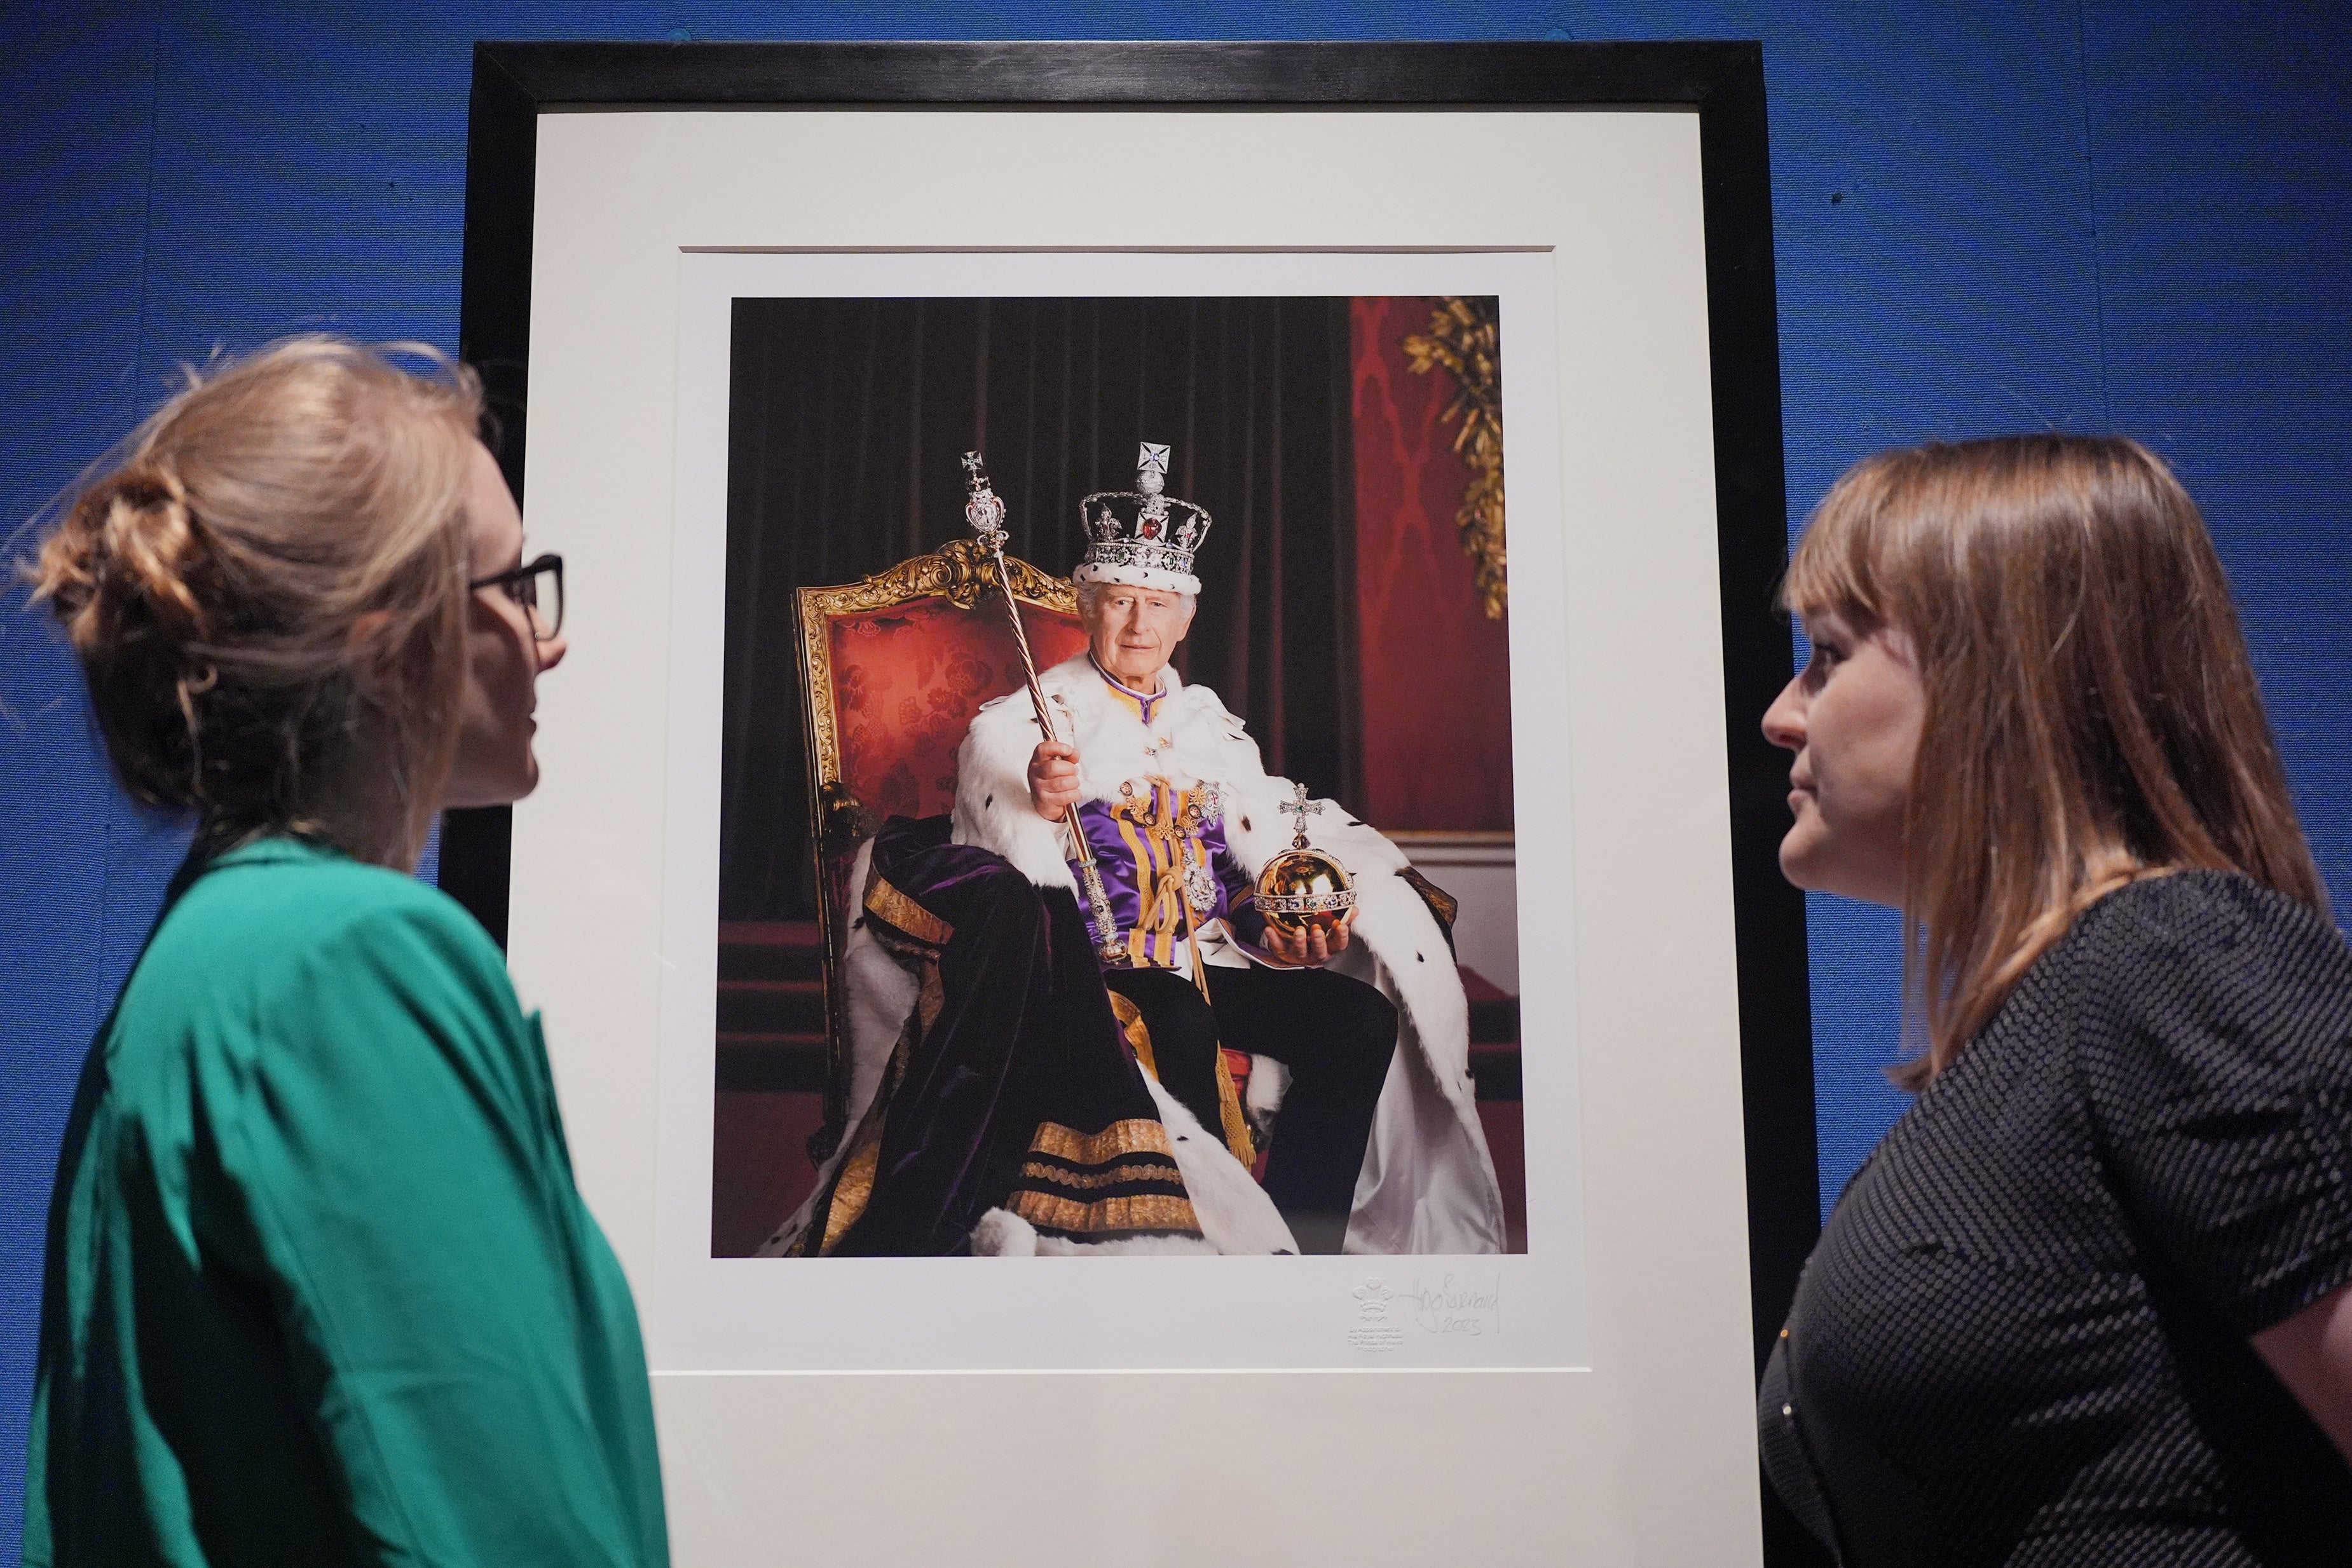 The photographer’s work has just gone on display at The King’s Gallery